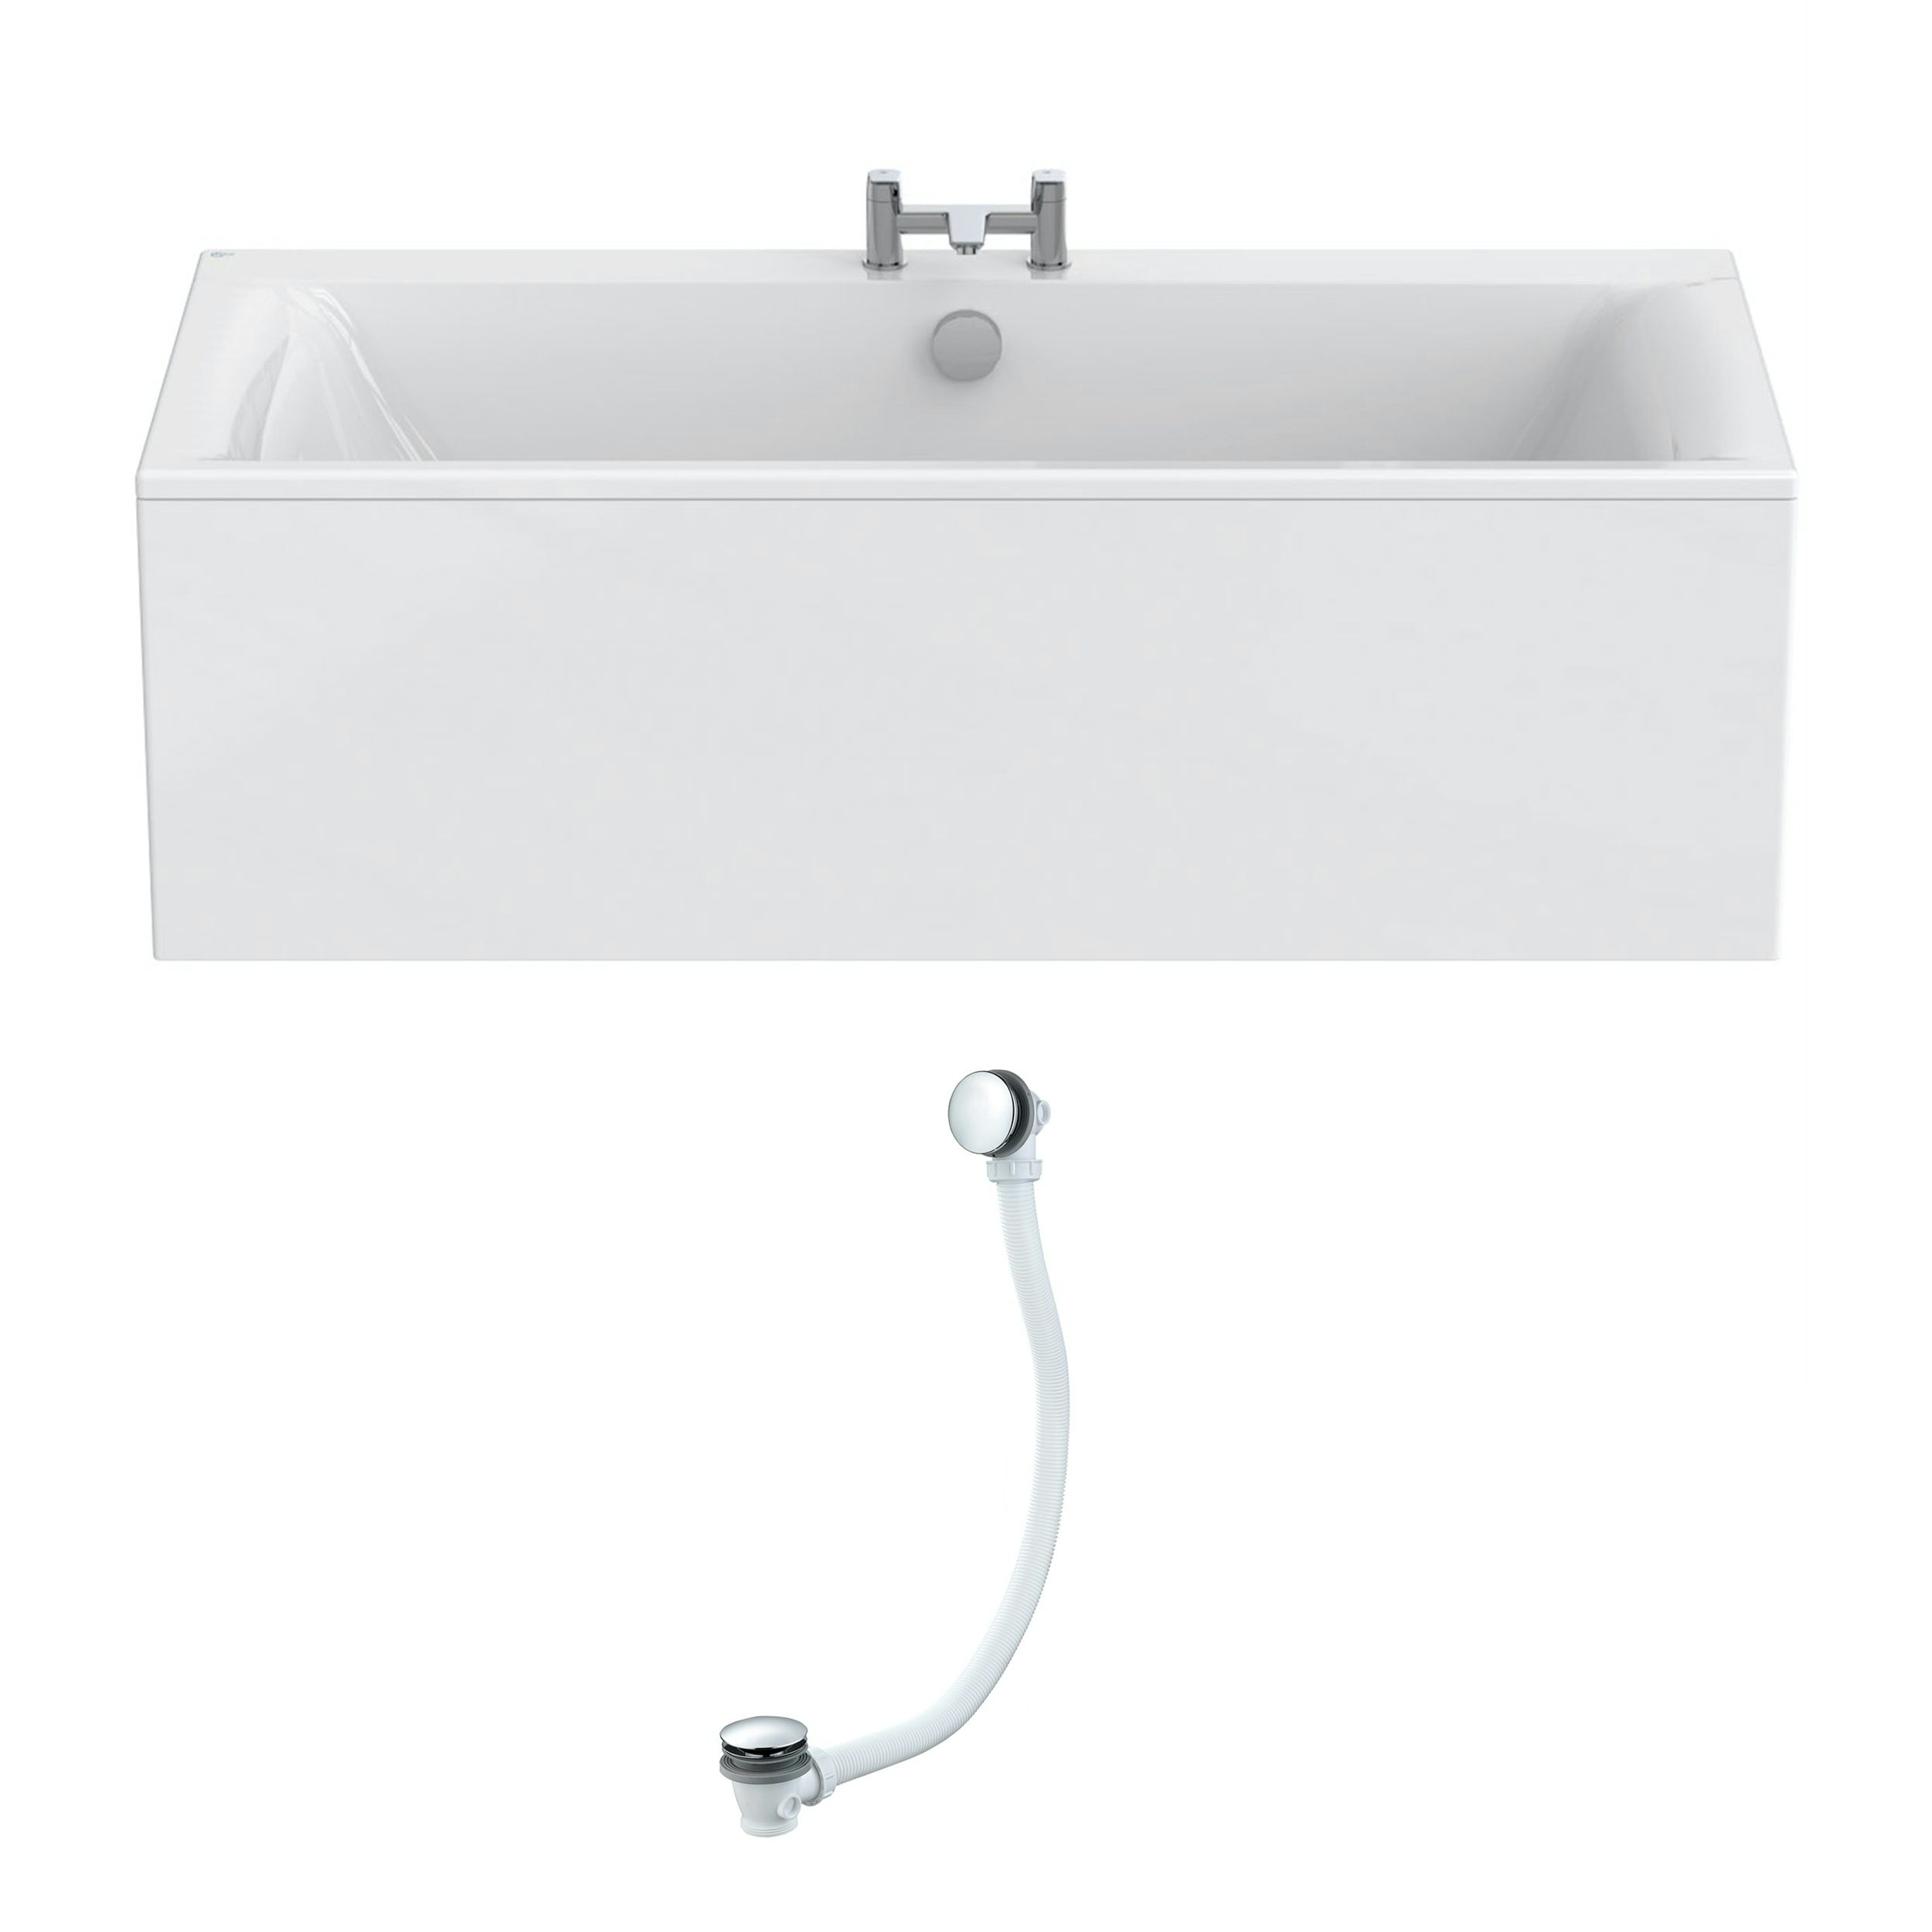 Ideal Standard Connect Air double ended rectangular straight bath and front panel 1700 x 750 with free bath waste